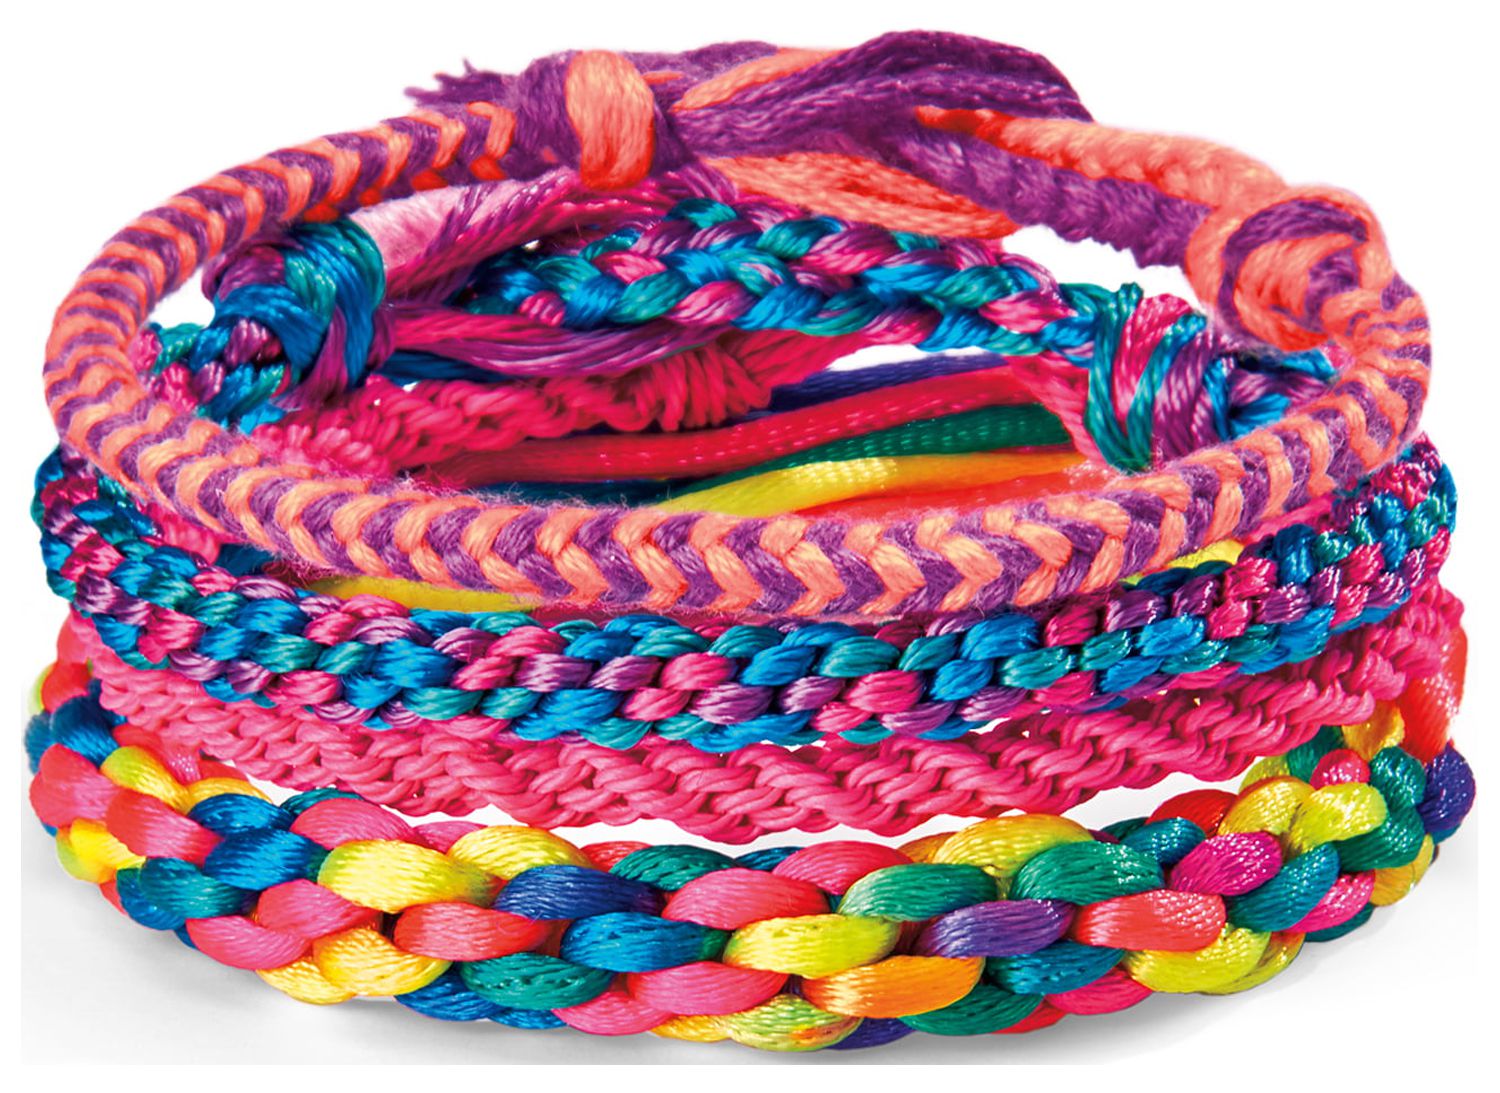 Cra-Z-Art Be Inspired 5-in-1 Friendship Bracelet Studio for Girls 6 Years of Age and Older - image 9 of 13